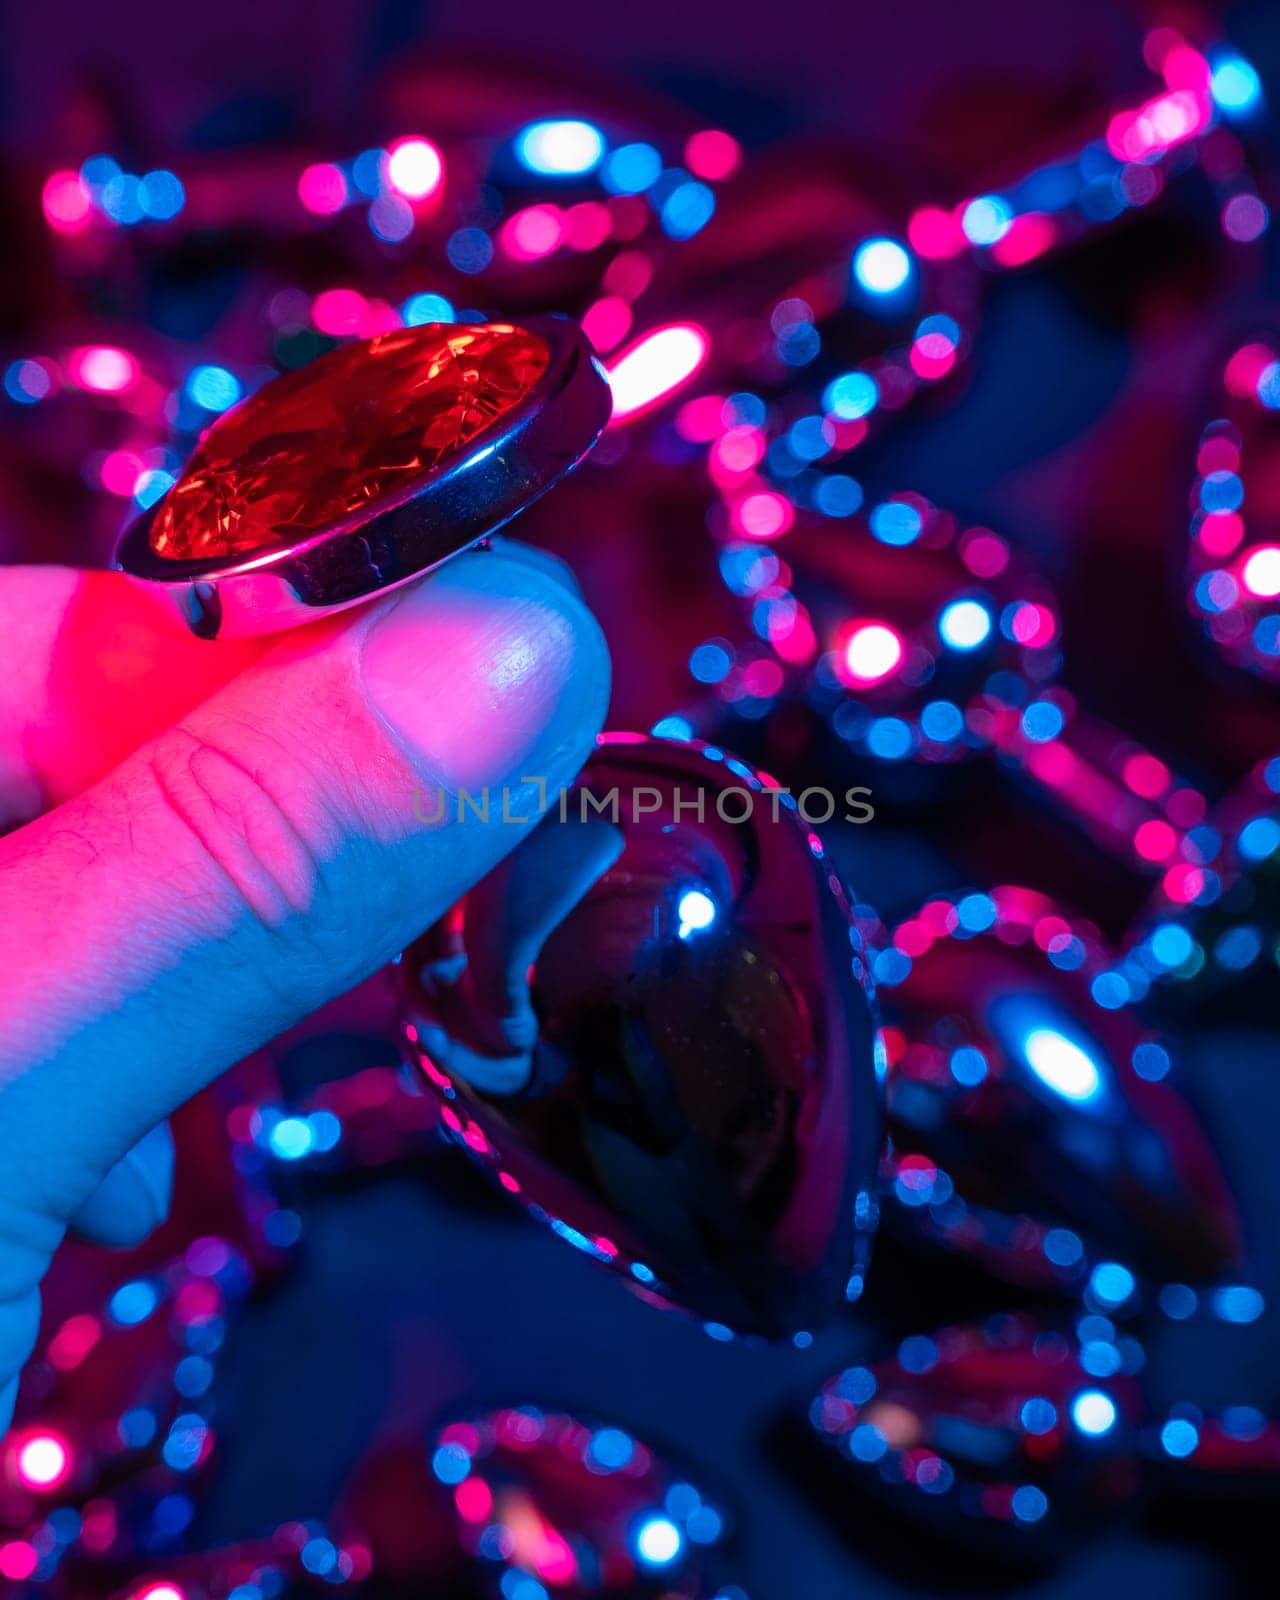 Man holding metal anal plug in neon pink purple light. by mrwed54